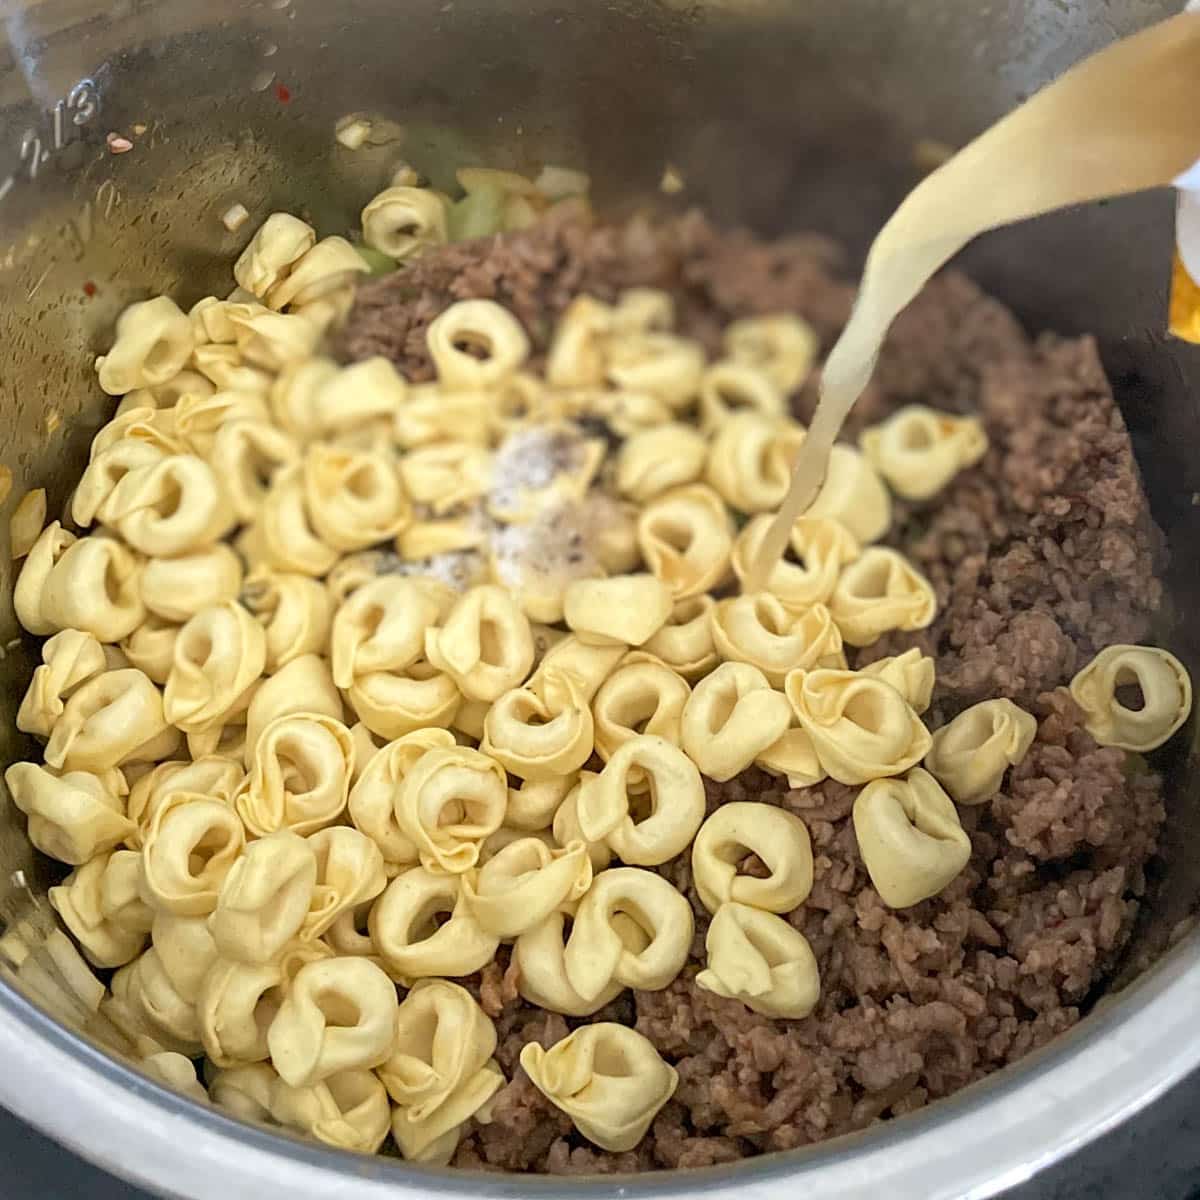 Tortellini, seasonings, sausage, and broth is added to the soup ingredients.